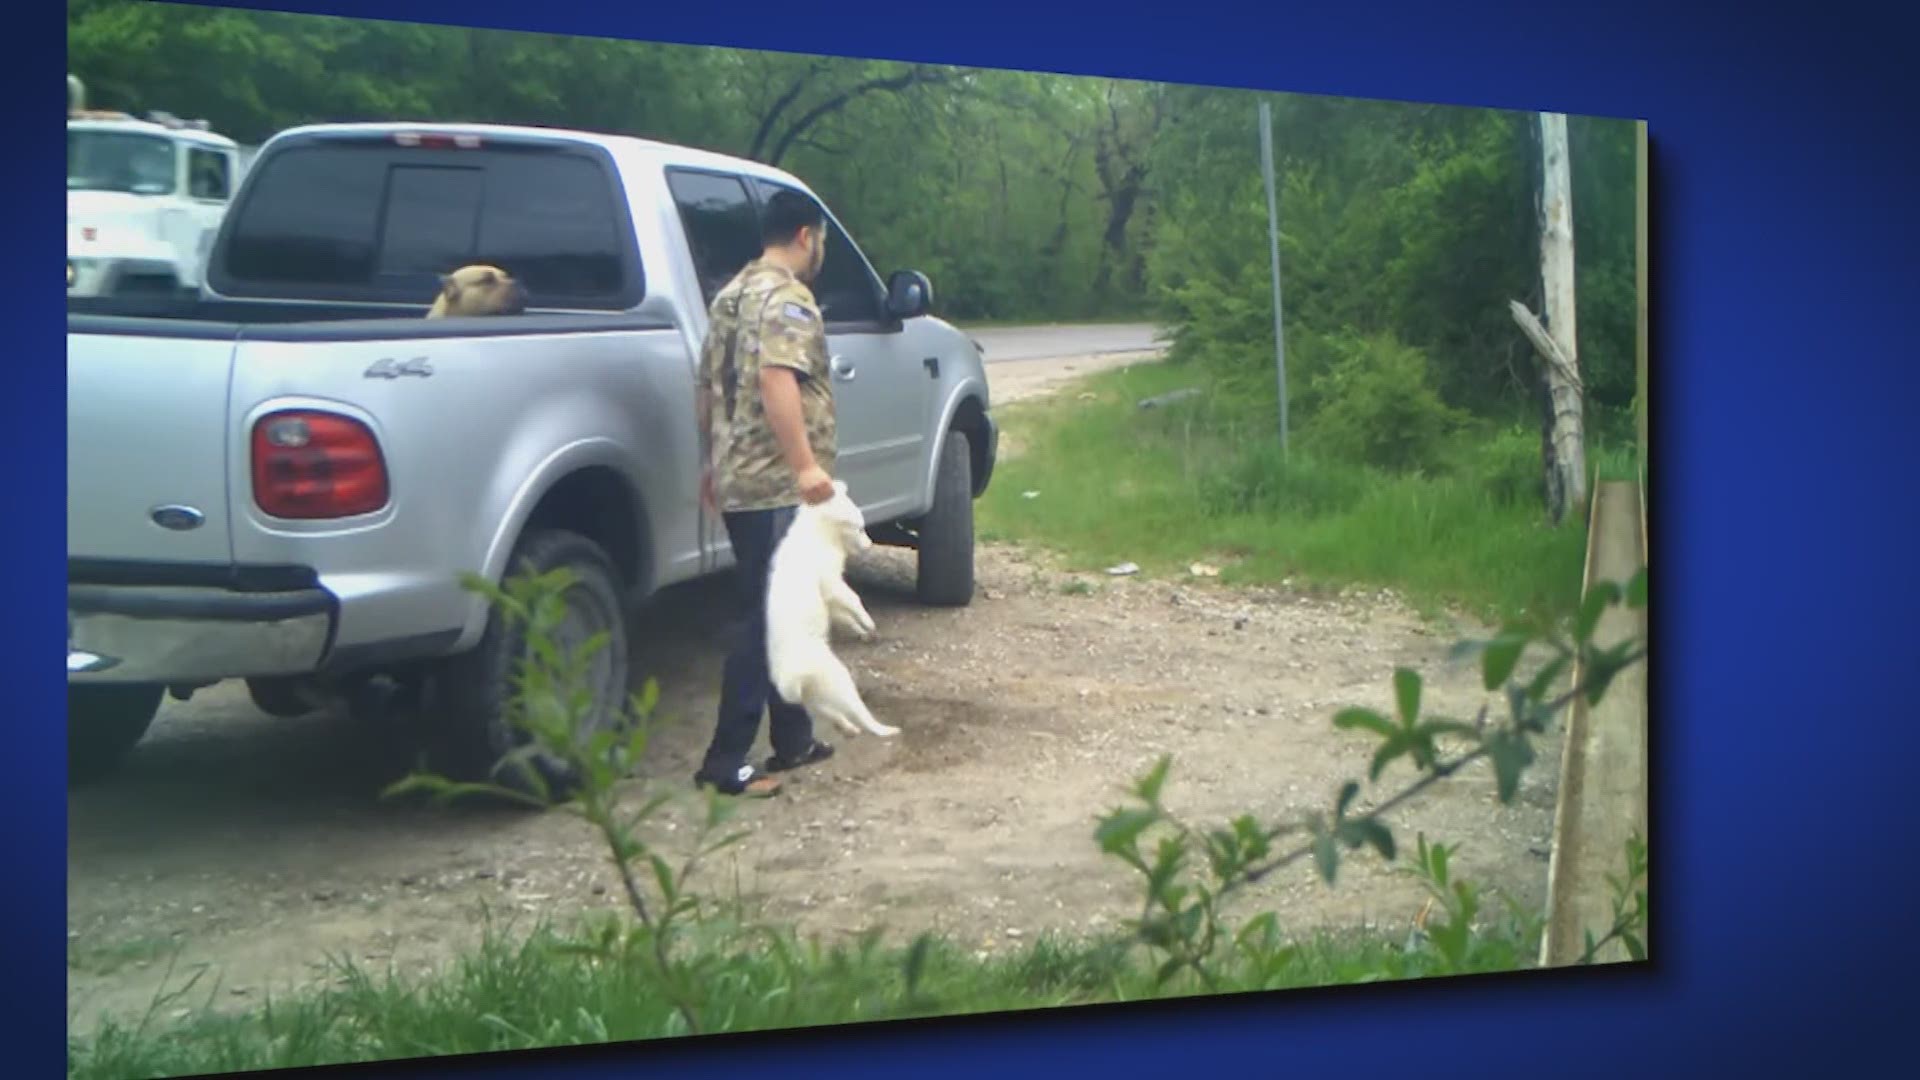 Officials said Sebastian Acosta, 20, was taken into custody and faces a charge of cruelty to non-livestock torture/kill, which is a third-degree felony.